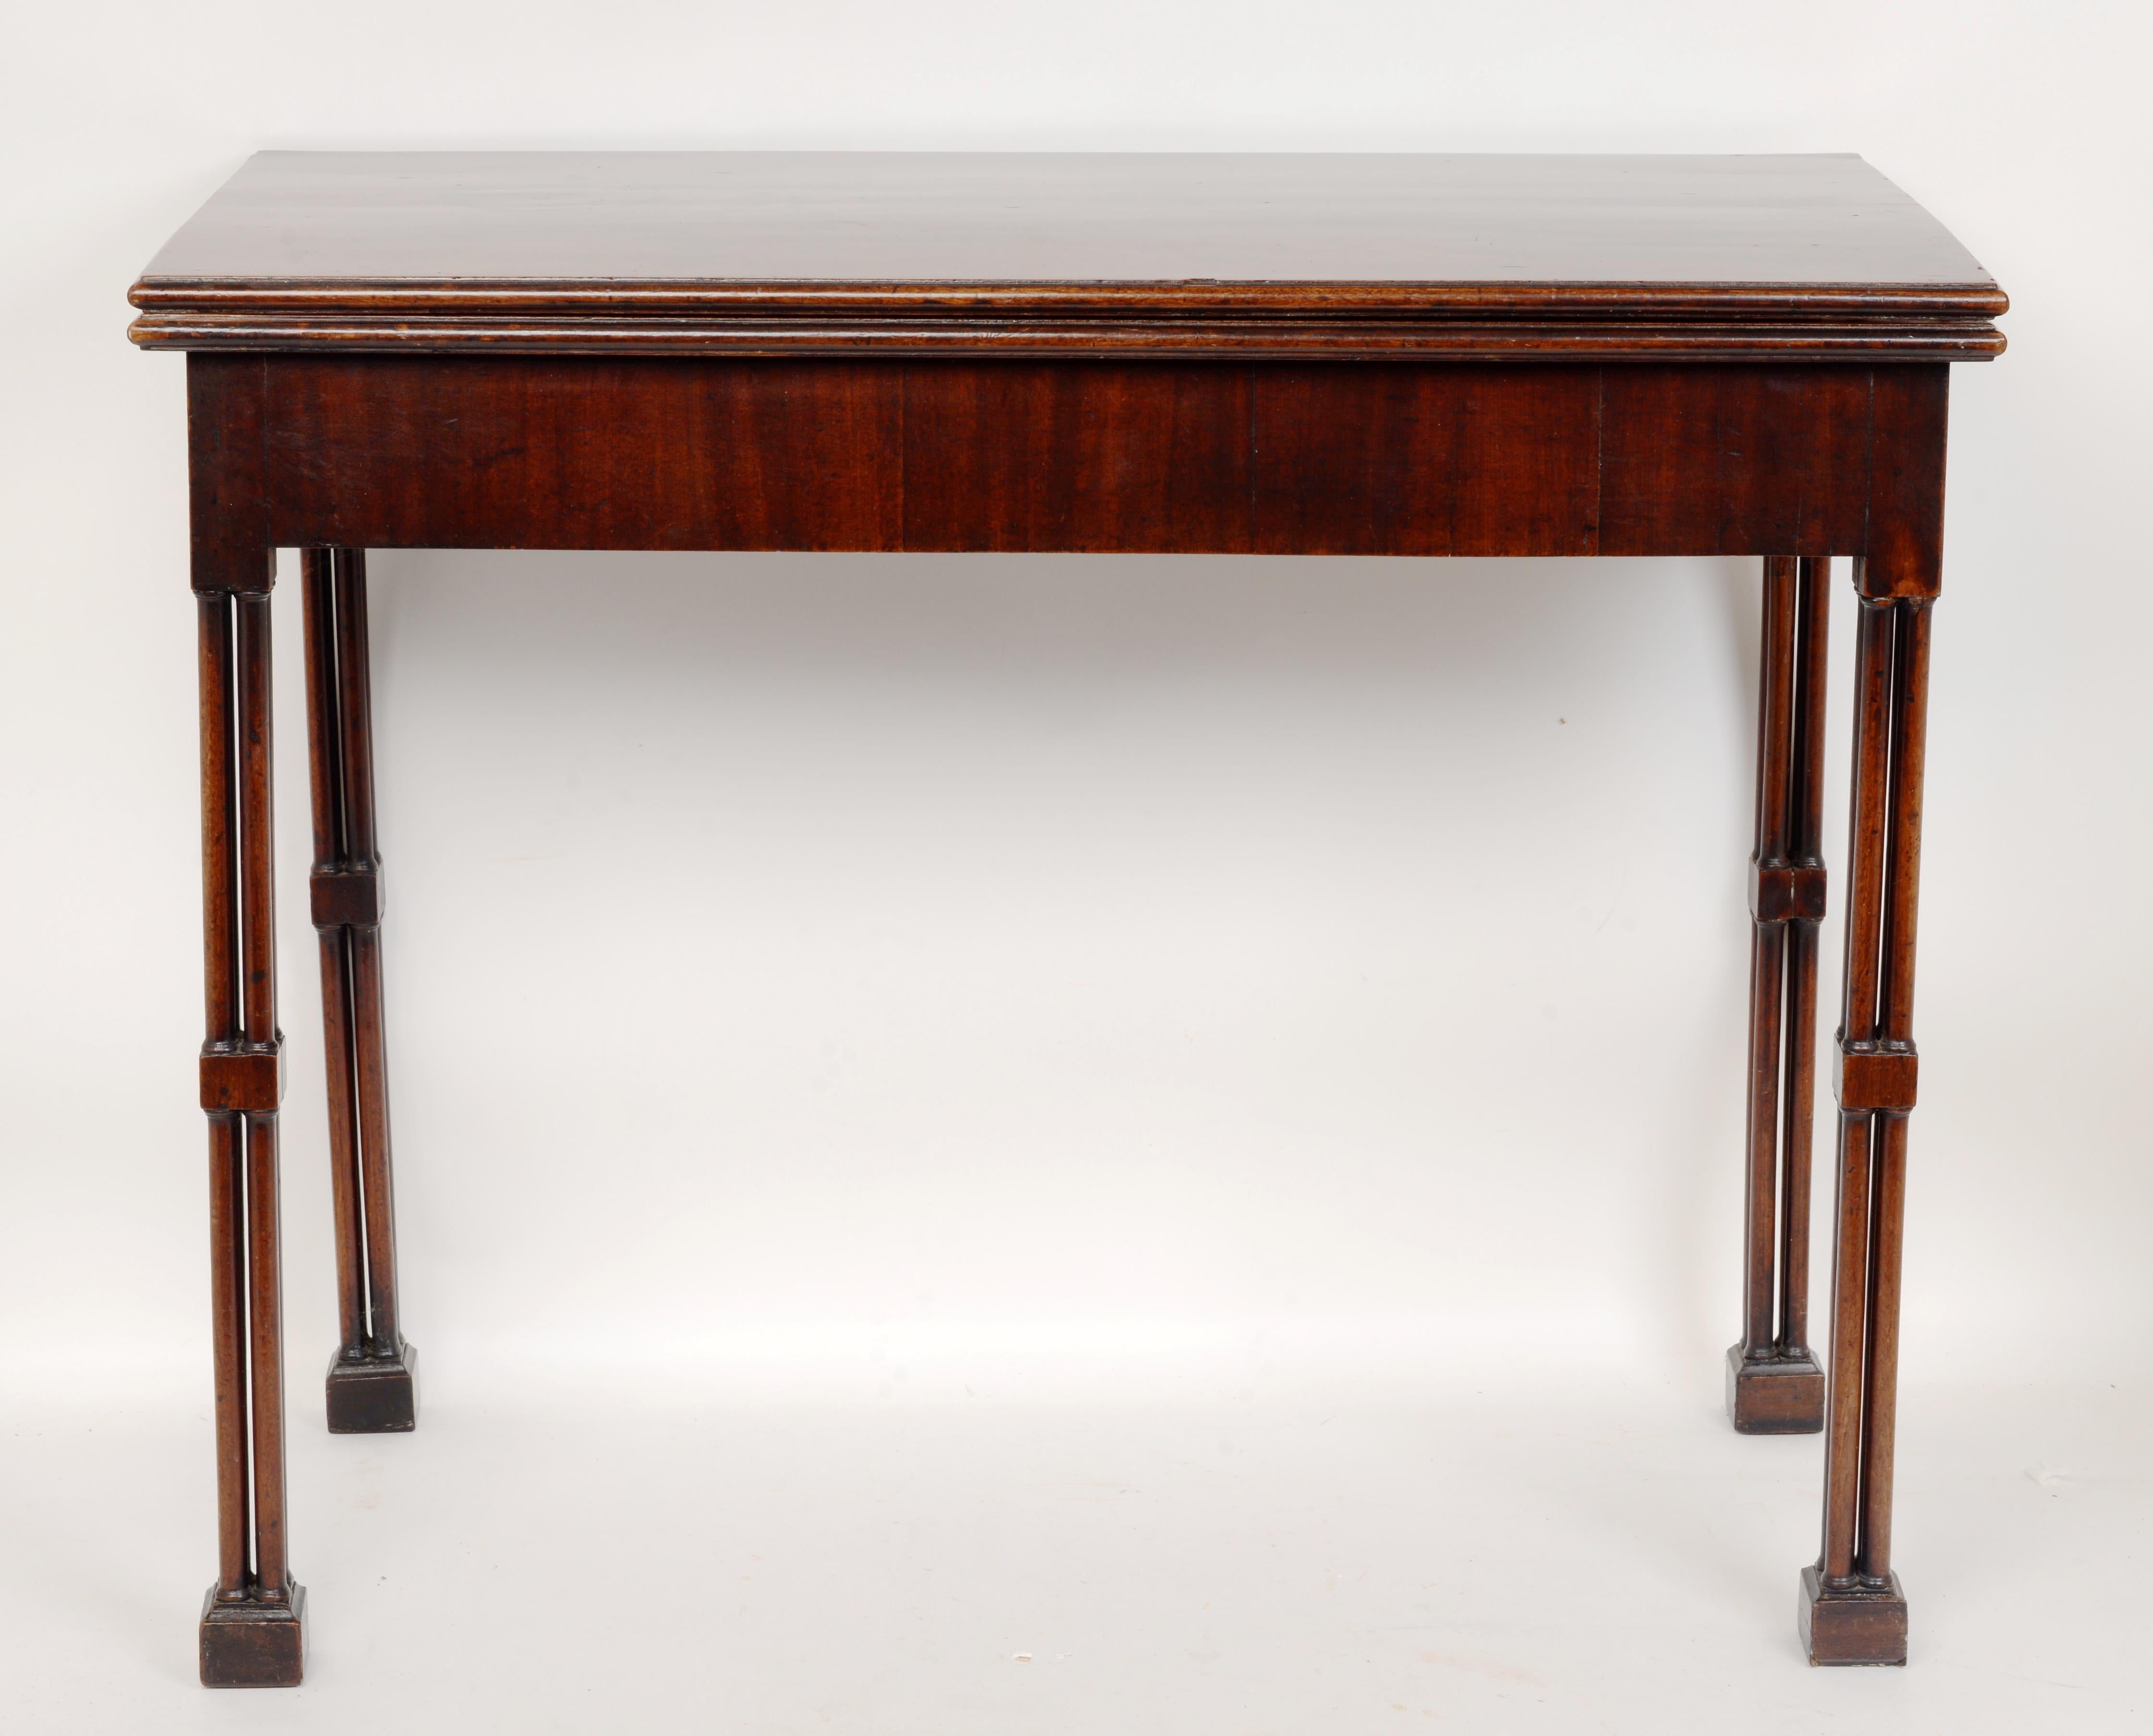 English Geo III Mahogany Fold-Over Card Table with Cluster-Leg & Concertina Action c1780 For Sale